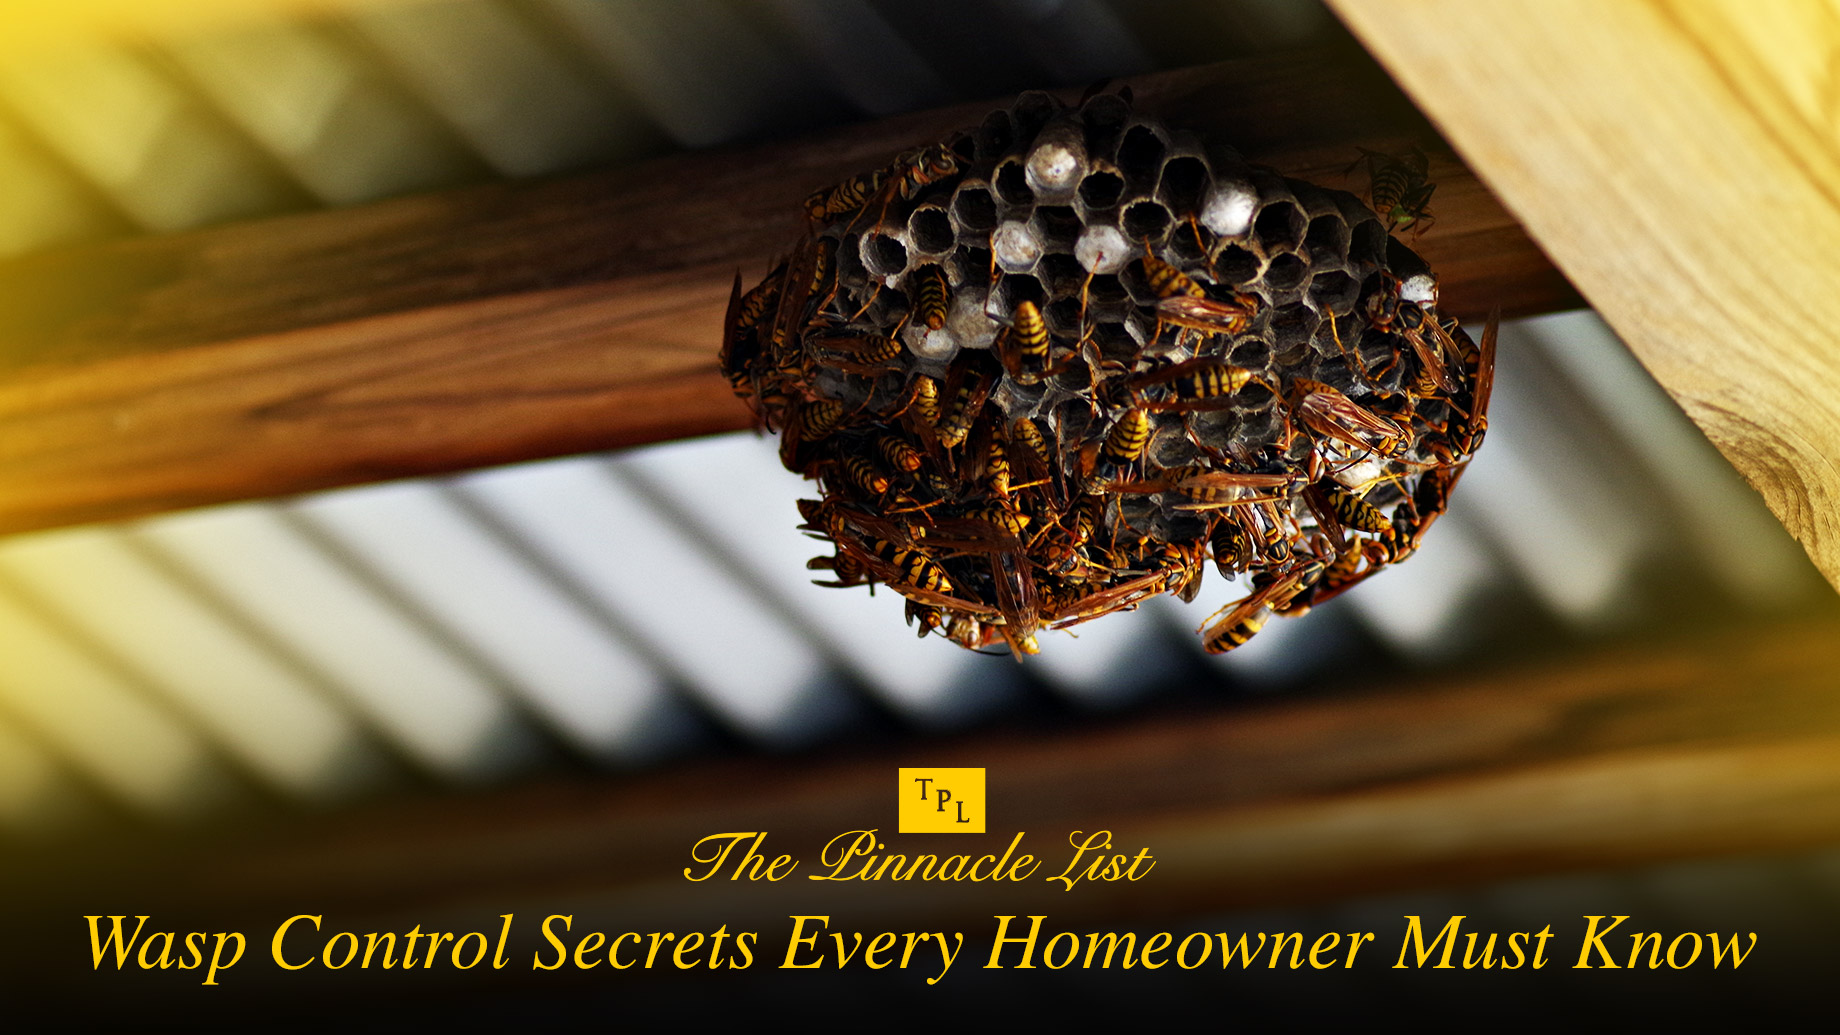 Wasp Control Secrets Every Homeowner Must Know